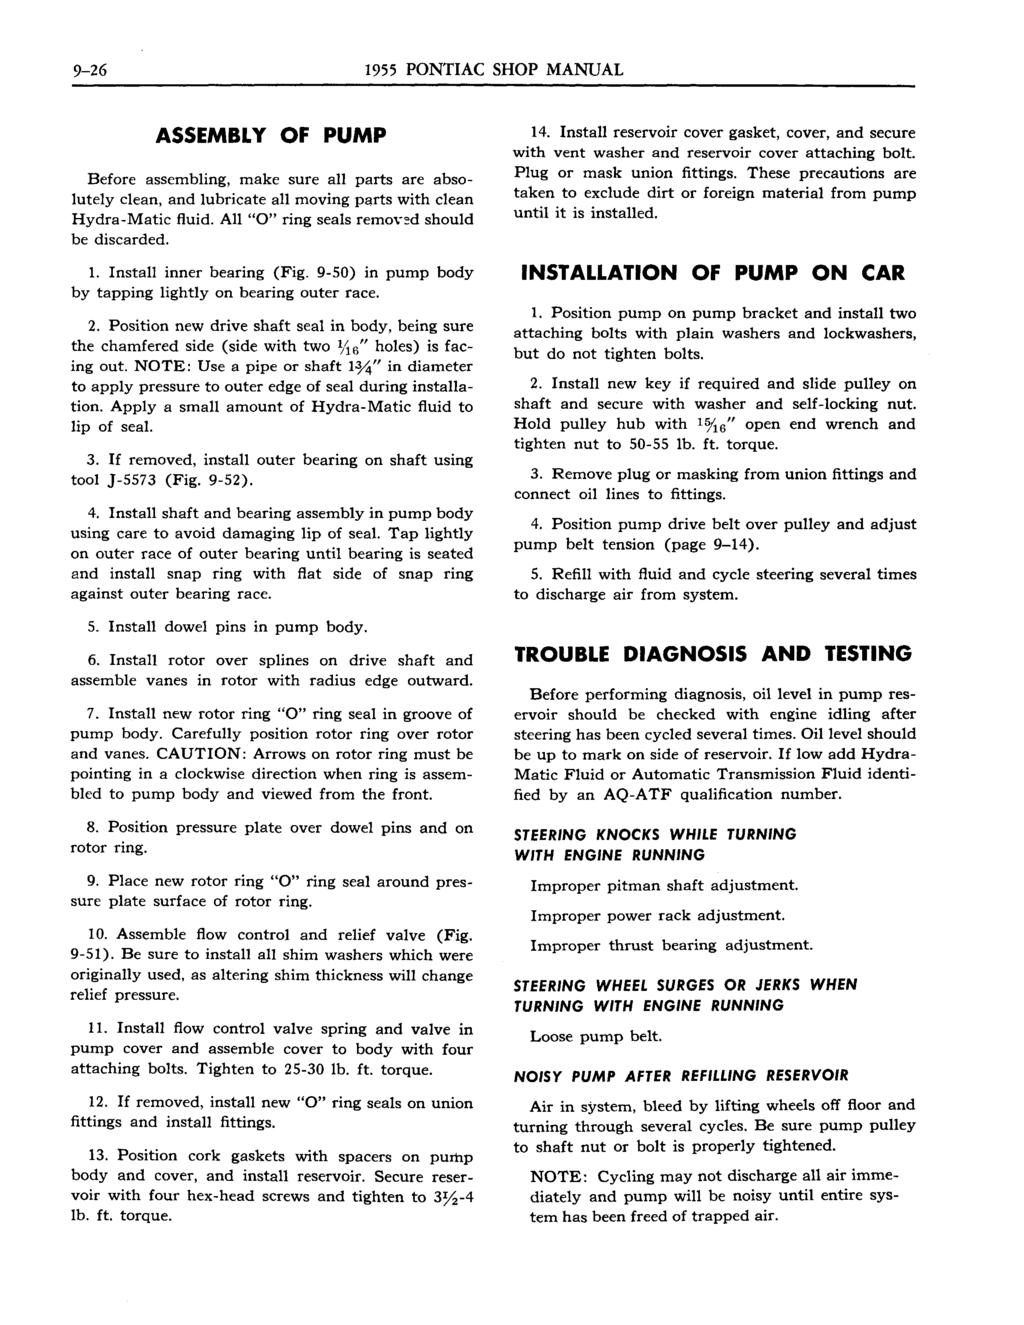 9-26 1955 PONTIAC SHOP MANUAL ASSEMBLY OF PUMP Before assembling, make sure all parts are absolutely clean, and lubricate all moving parts with clean Hydra-Matic fluid.